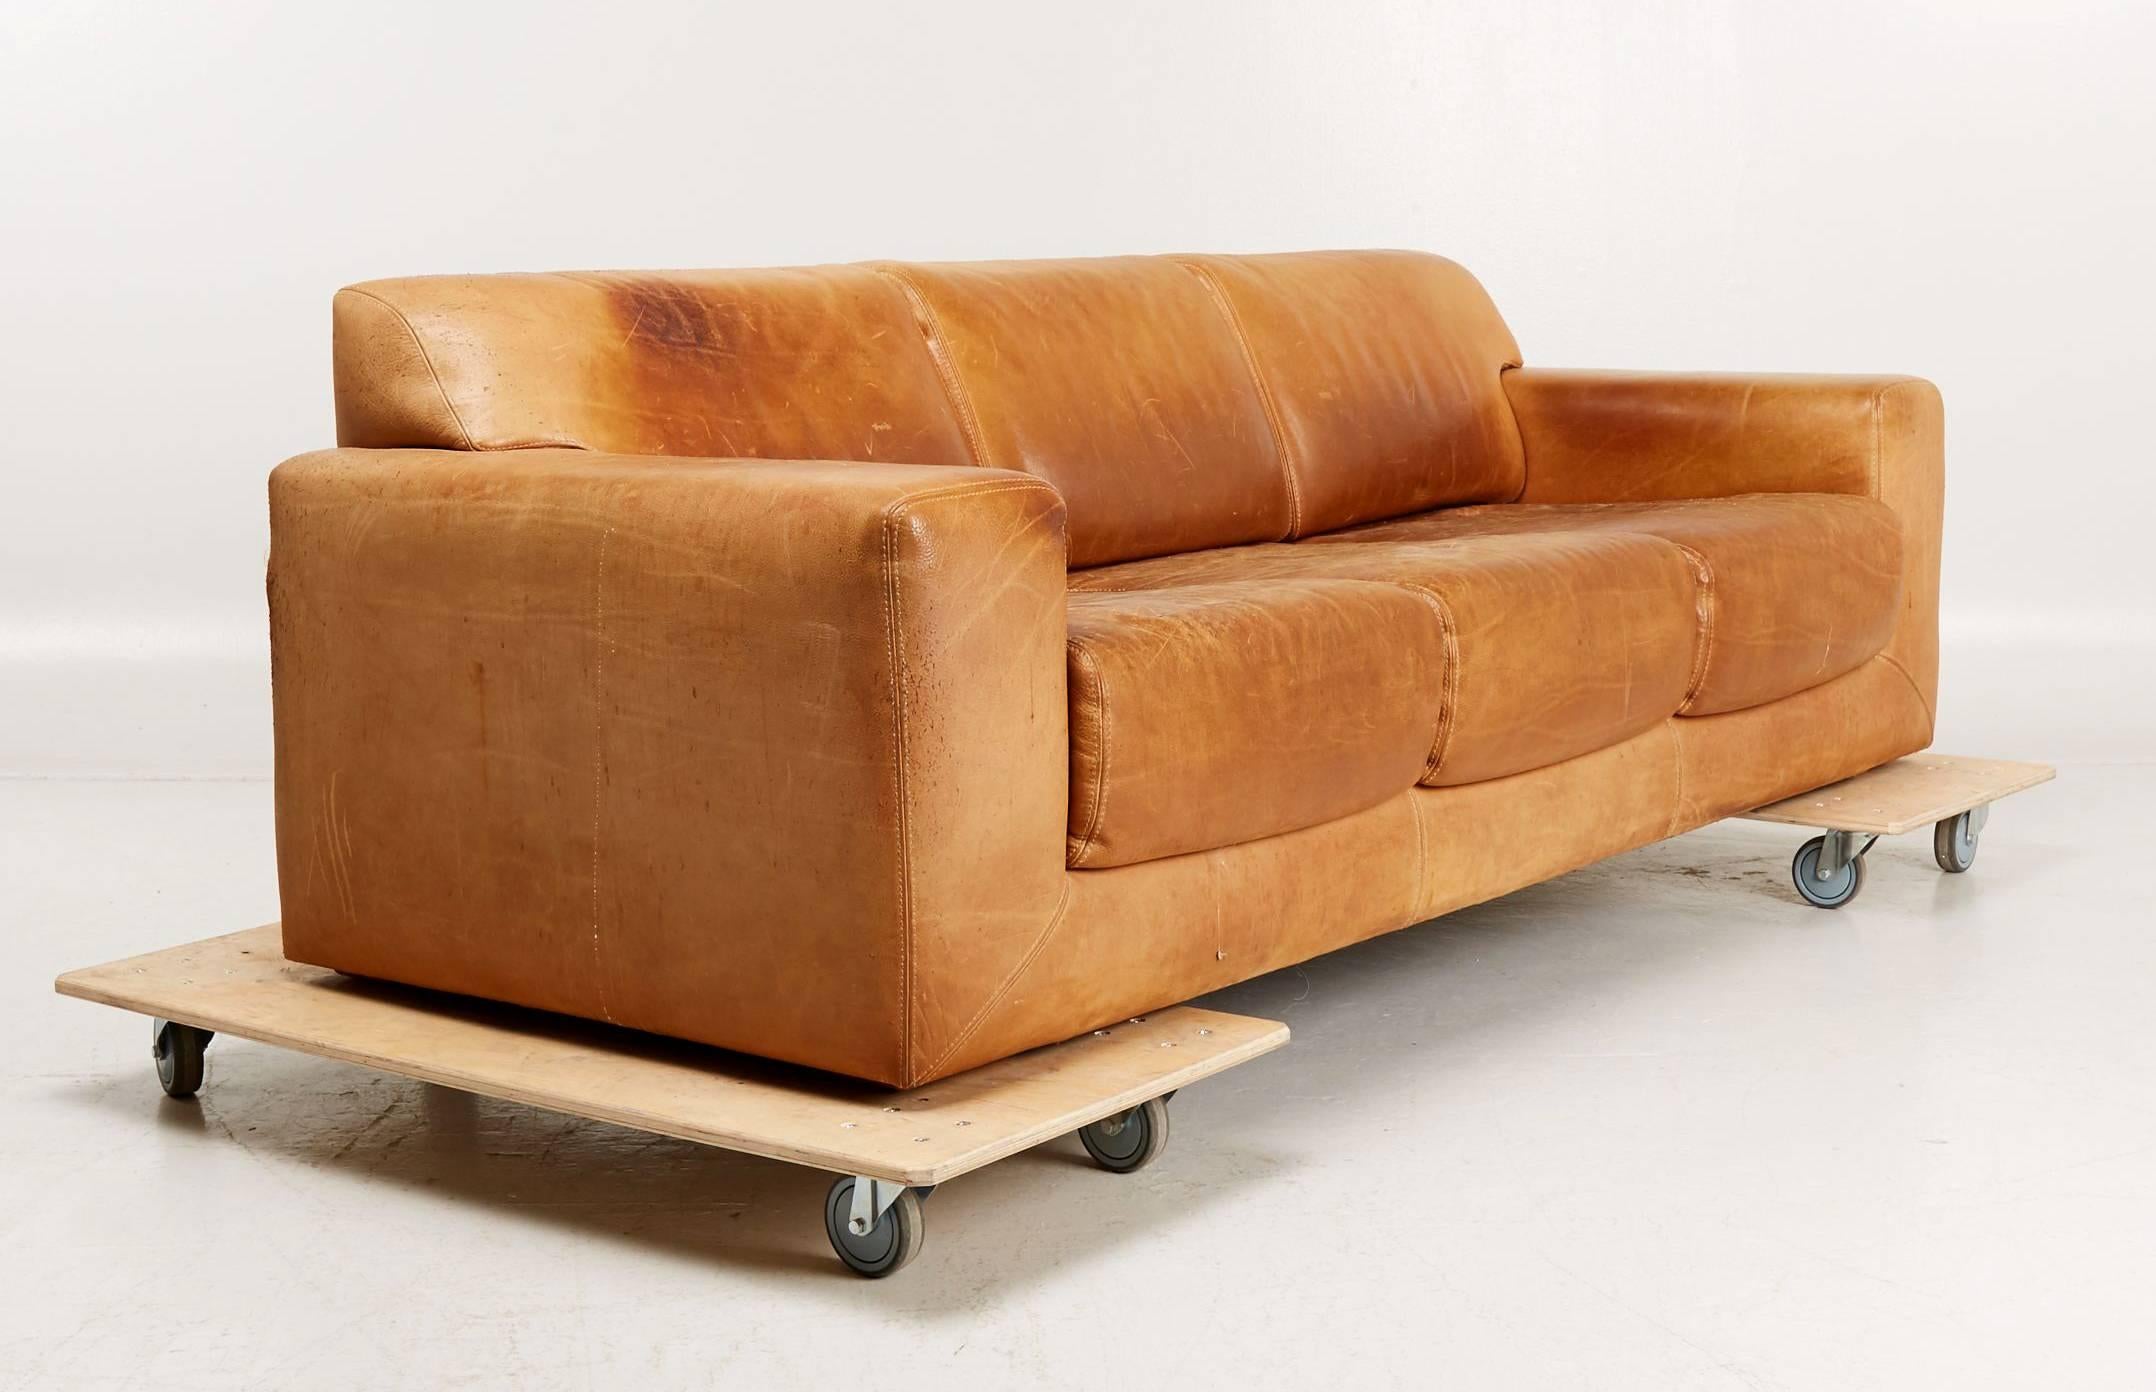 Three-seat sofa upholstered in beautiful vintage oxhide brown leather, produced by DUX in Sweden in 1970s. Scandinavian Modern.